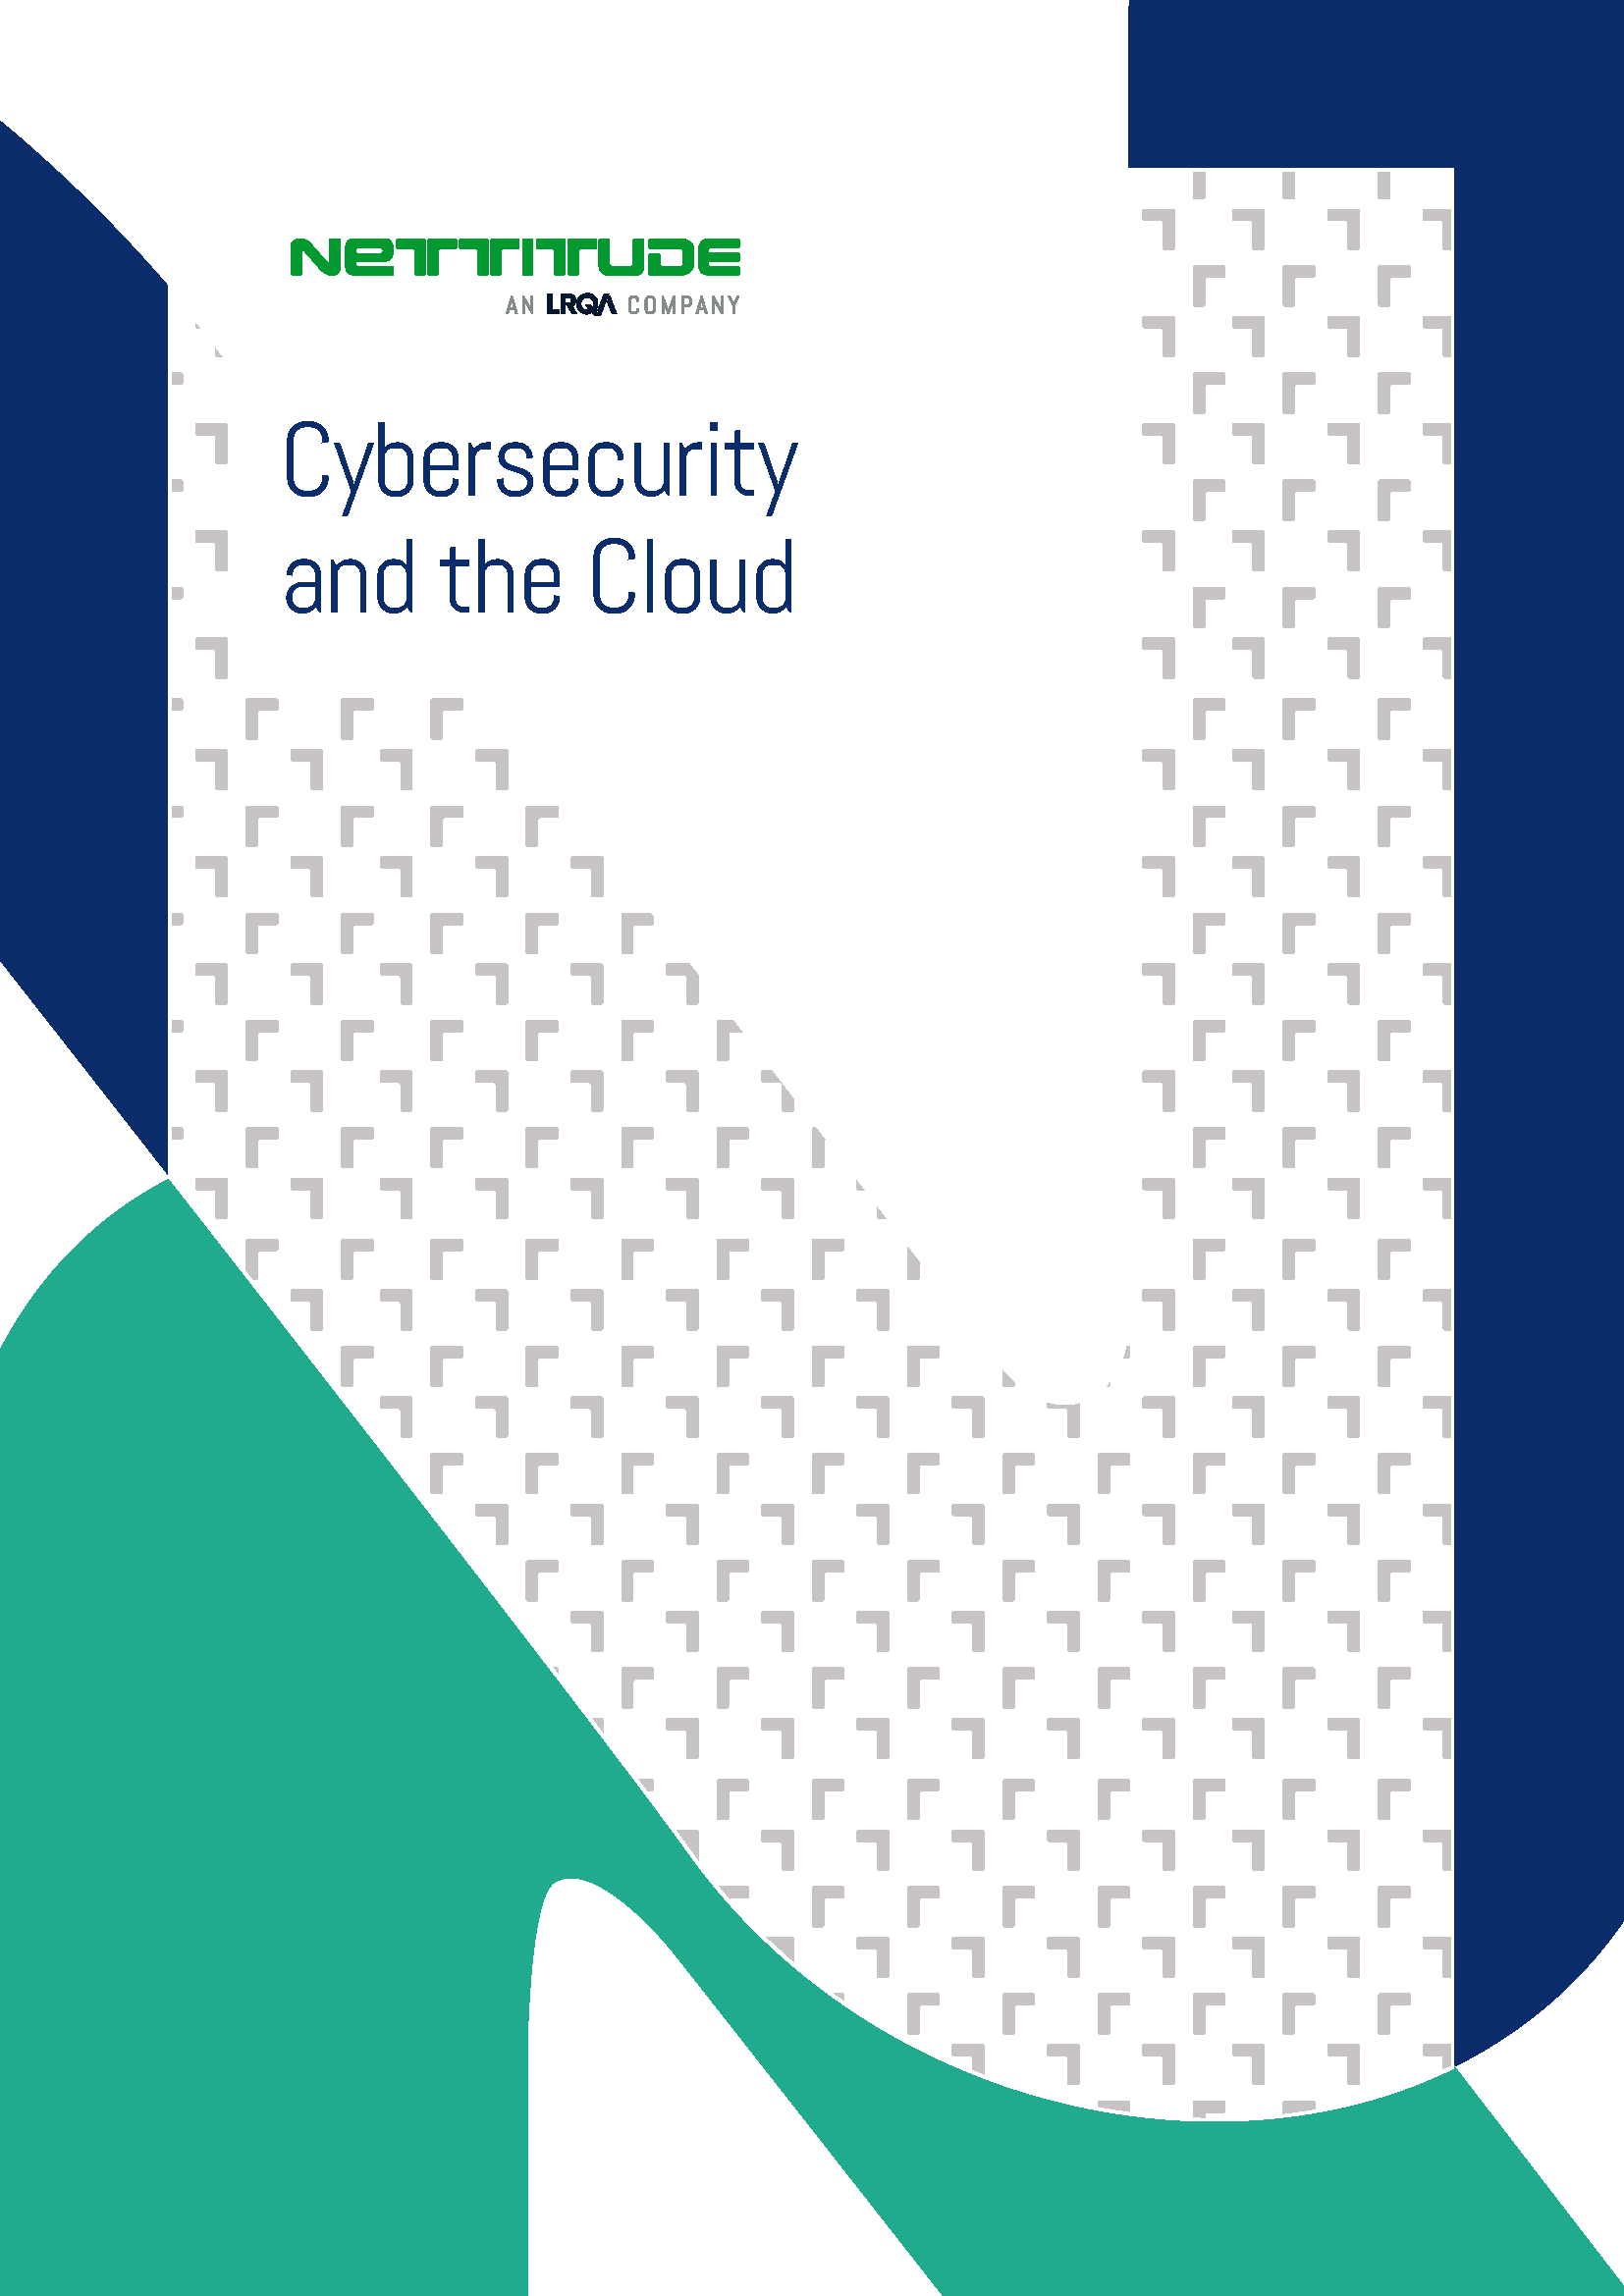 Pages from NETT_CYBER_SECURITY_&CLOUD_2021